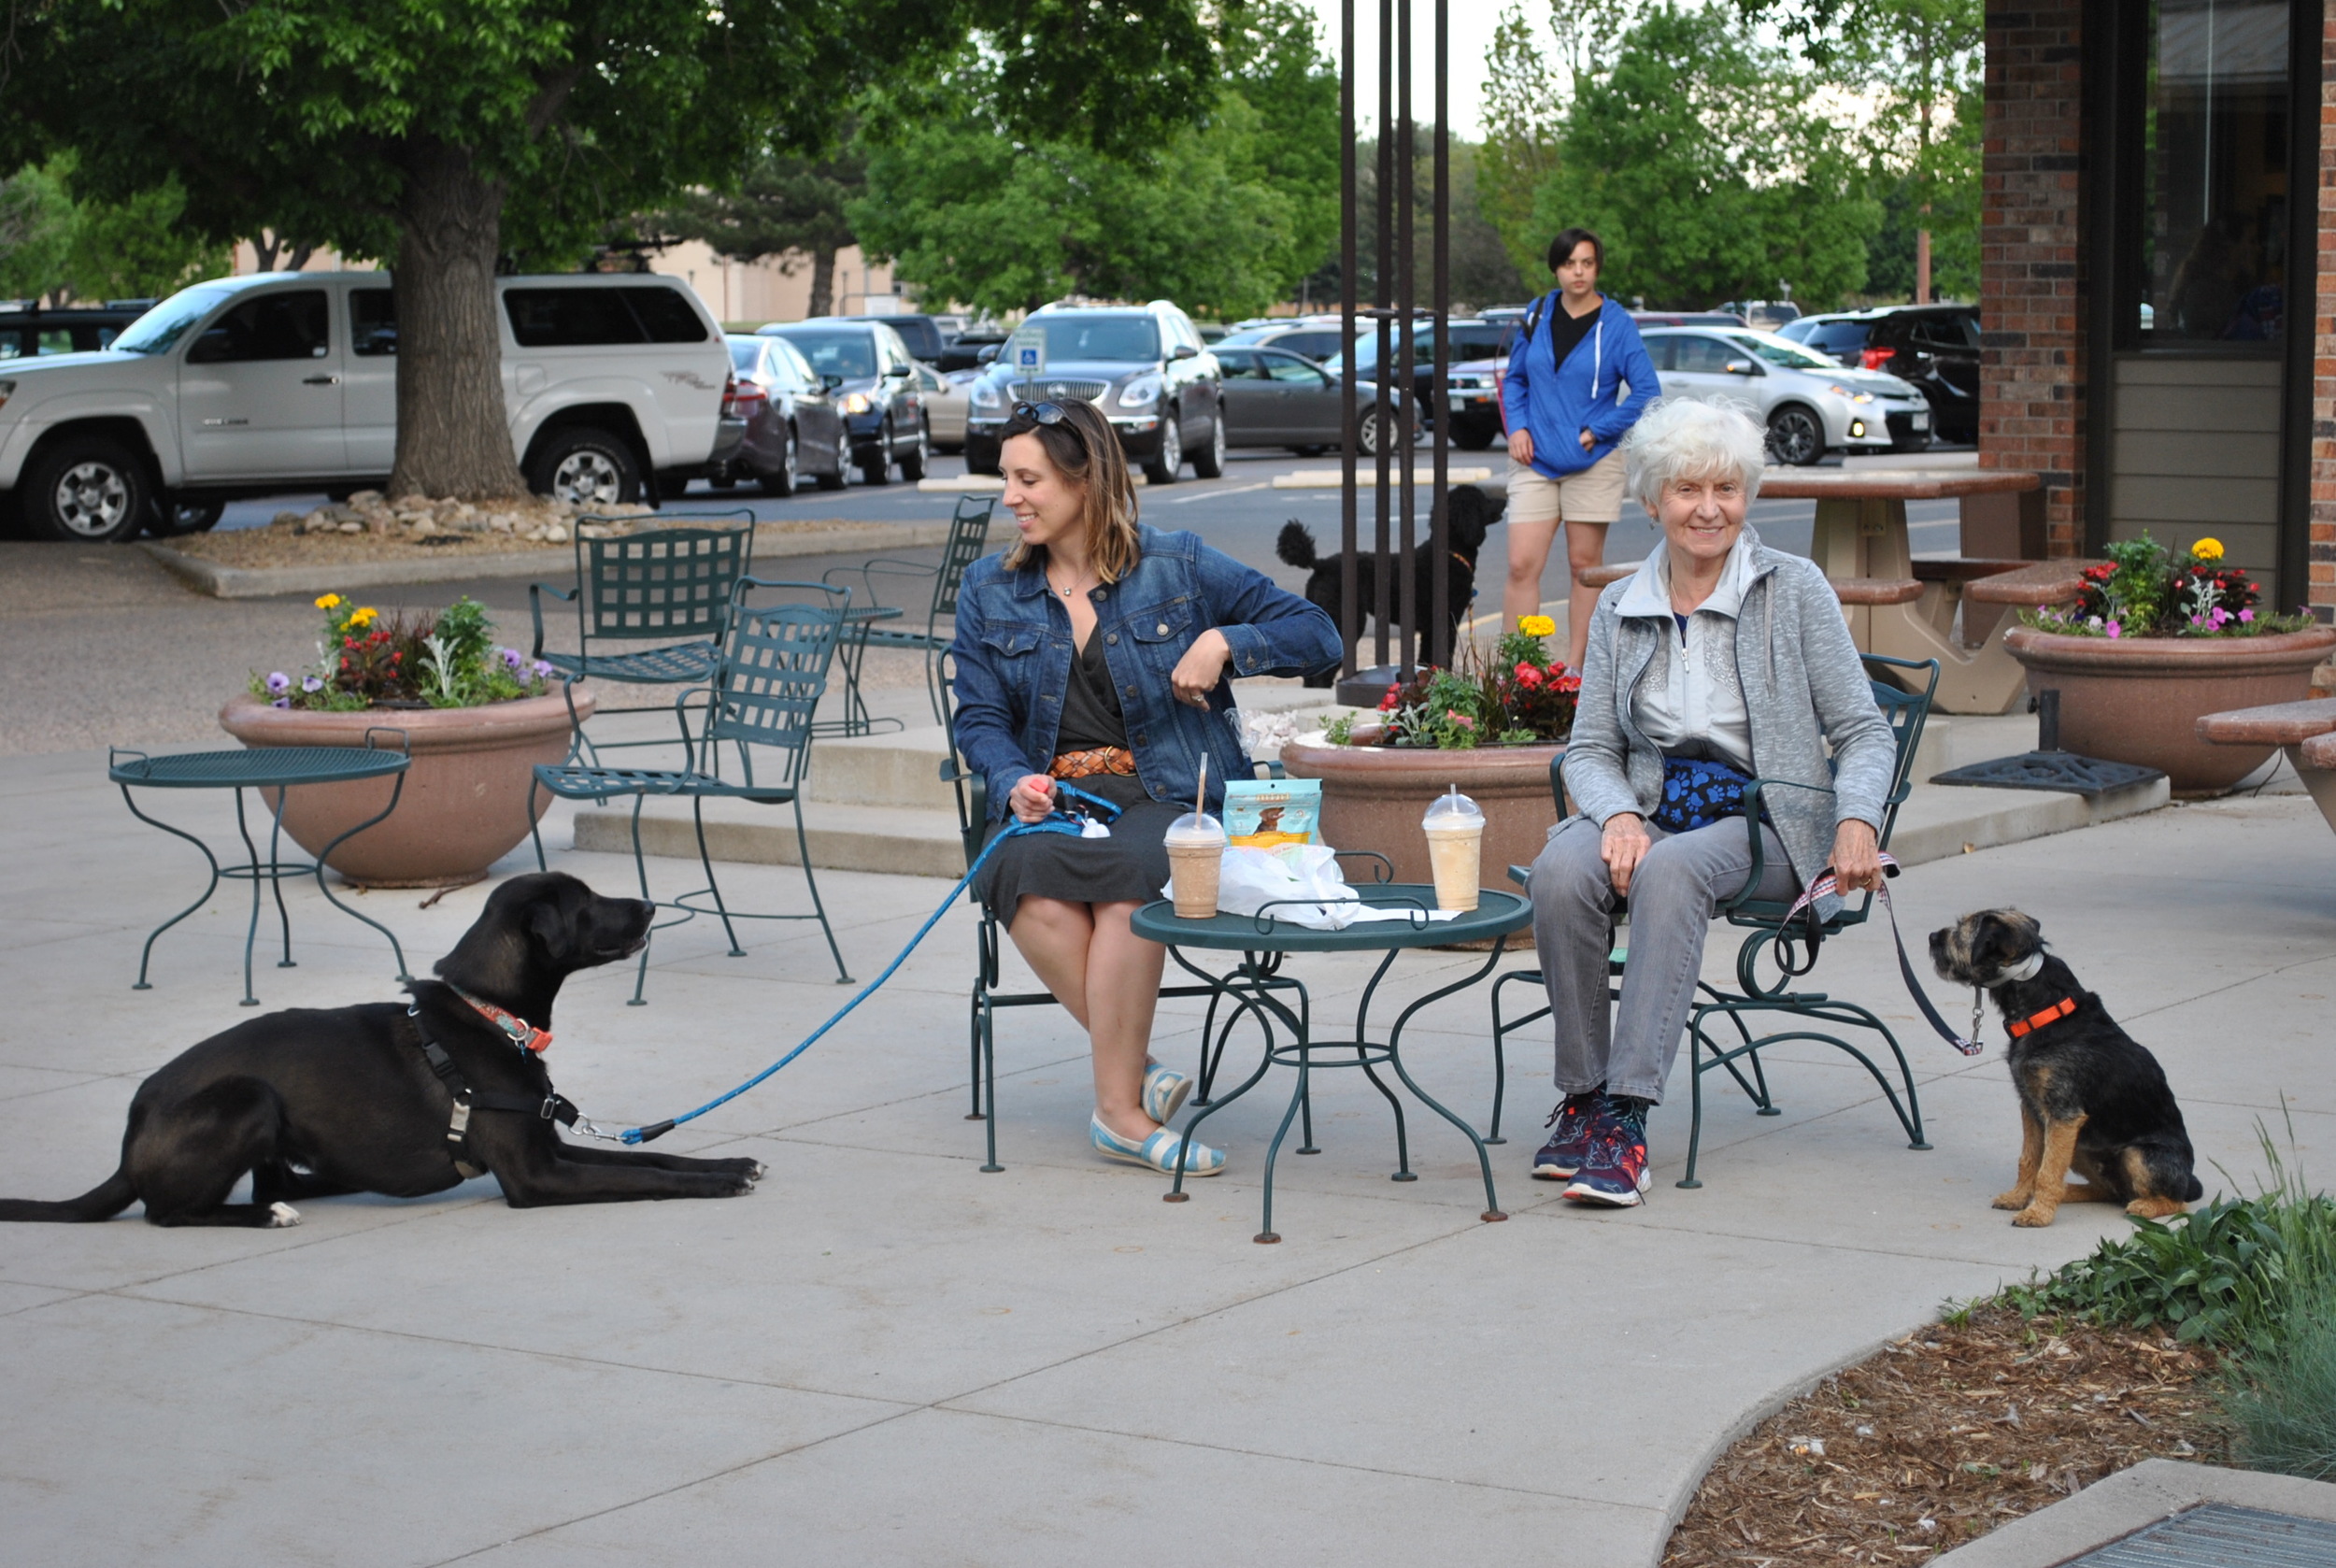 Dog Training at a local Fort Collins shopping plaza